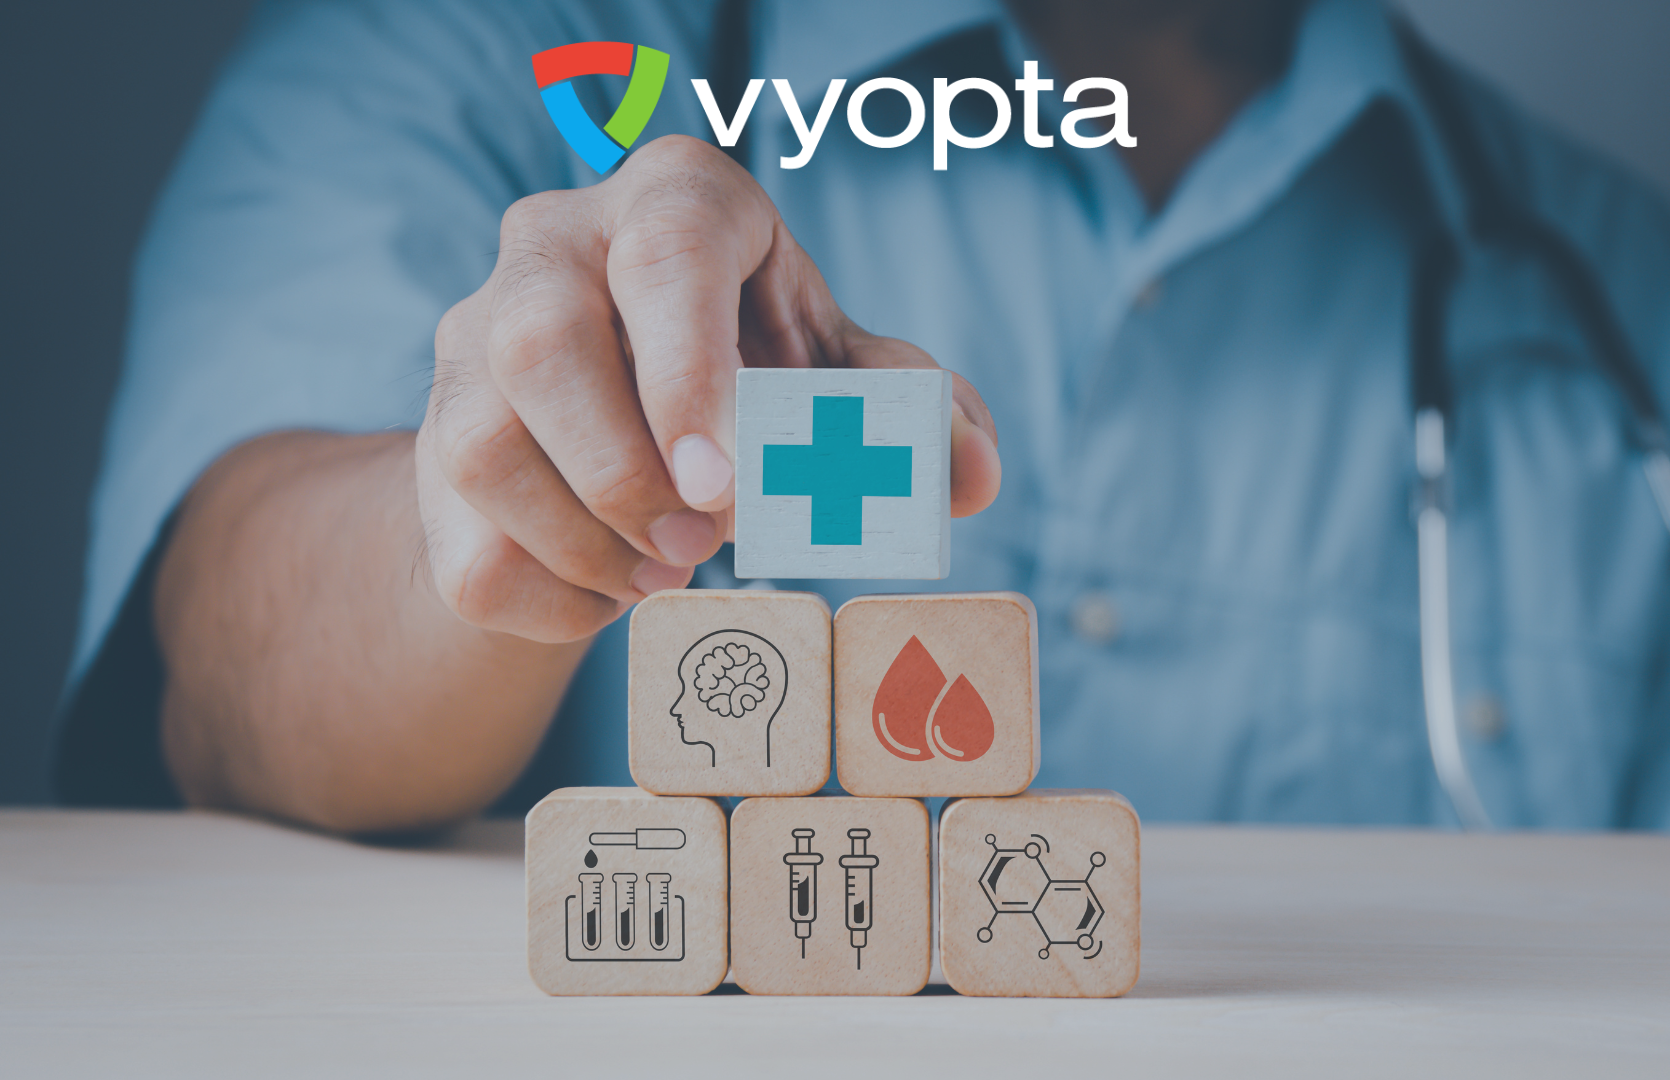 Vyopta Healthcare and Life Science Subscriptions Increase by Nearly 500% Since Start of COVID-19 Pandemic